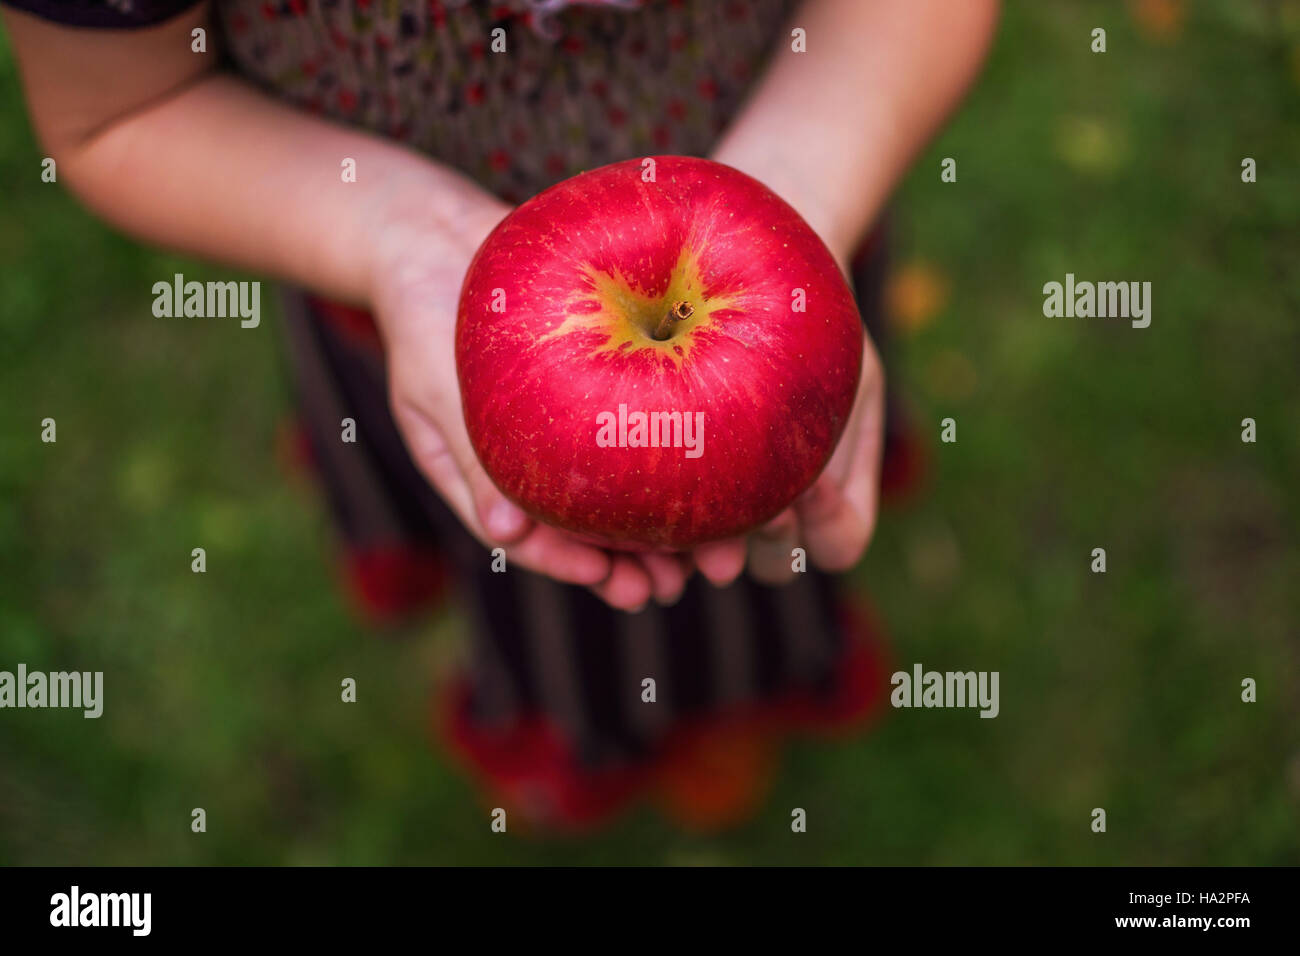 Girl holding an apple in her hands Stock Photo